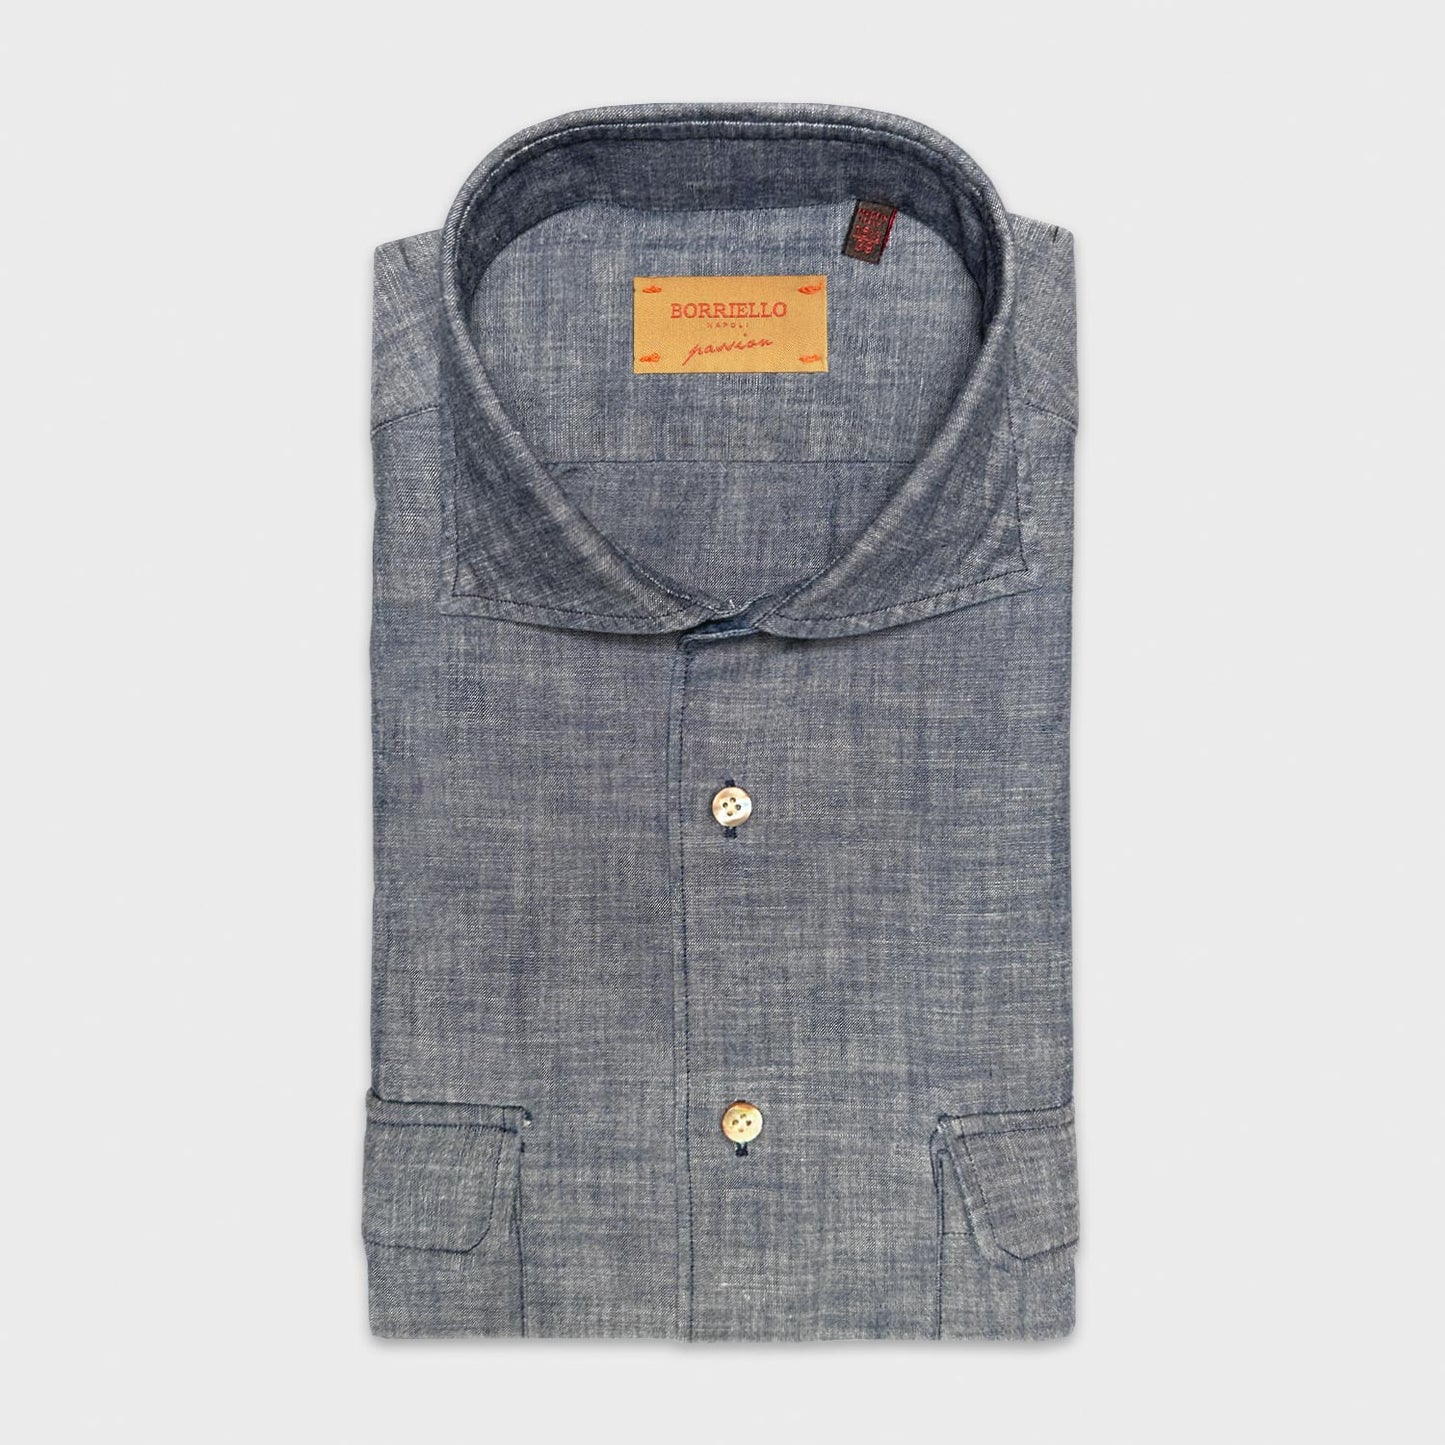 Load image into Gallery viewer, Safari Shirt Chambray Cotton Indigo Navy. Men&amp;#39;s safari shirt handmade in Italy by Borriello Napoli. The model of this sporty shirt is originally designed for safari trips, it has always been appreciated for its comfort with four pockets in the front, always trendy in this flamed indigo navy color.
